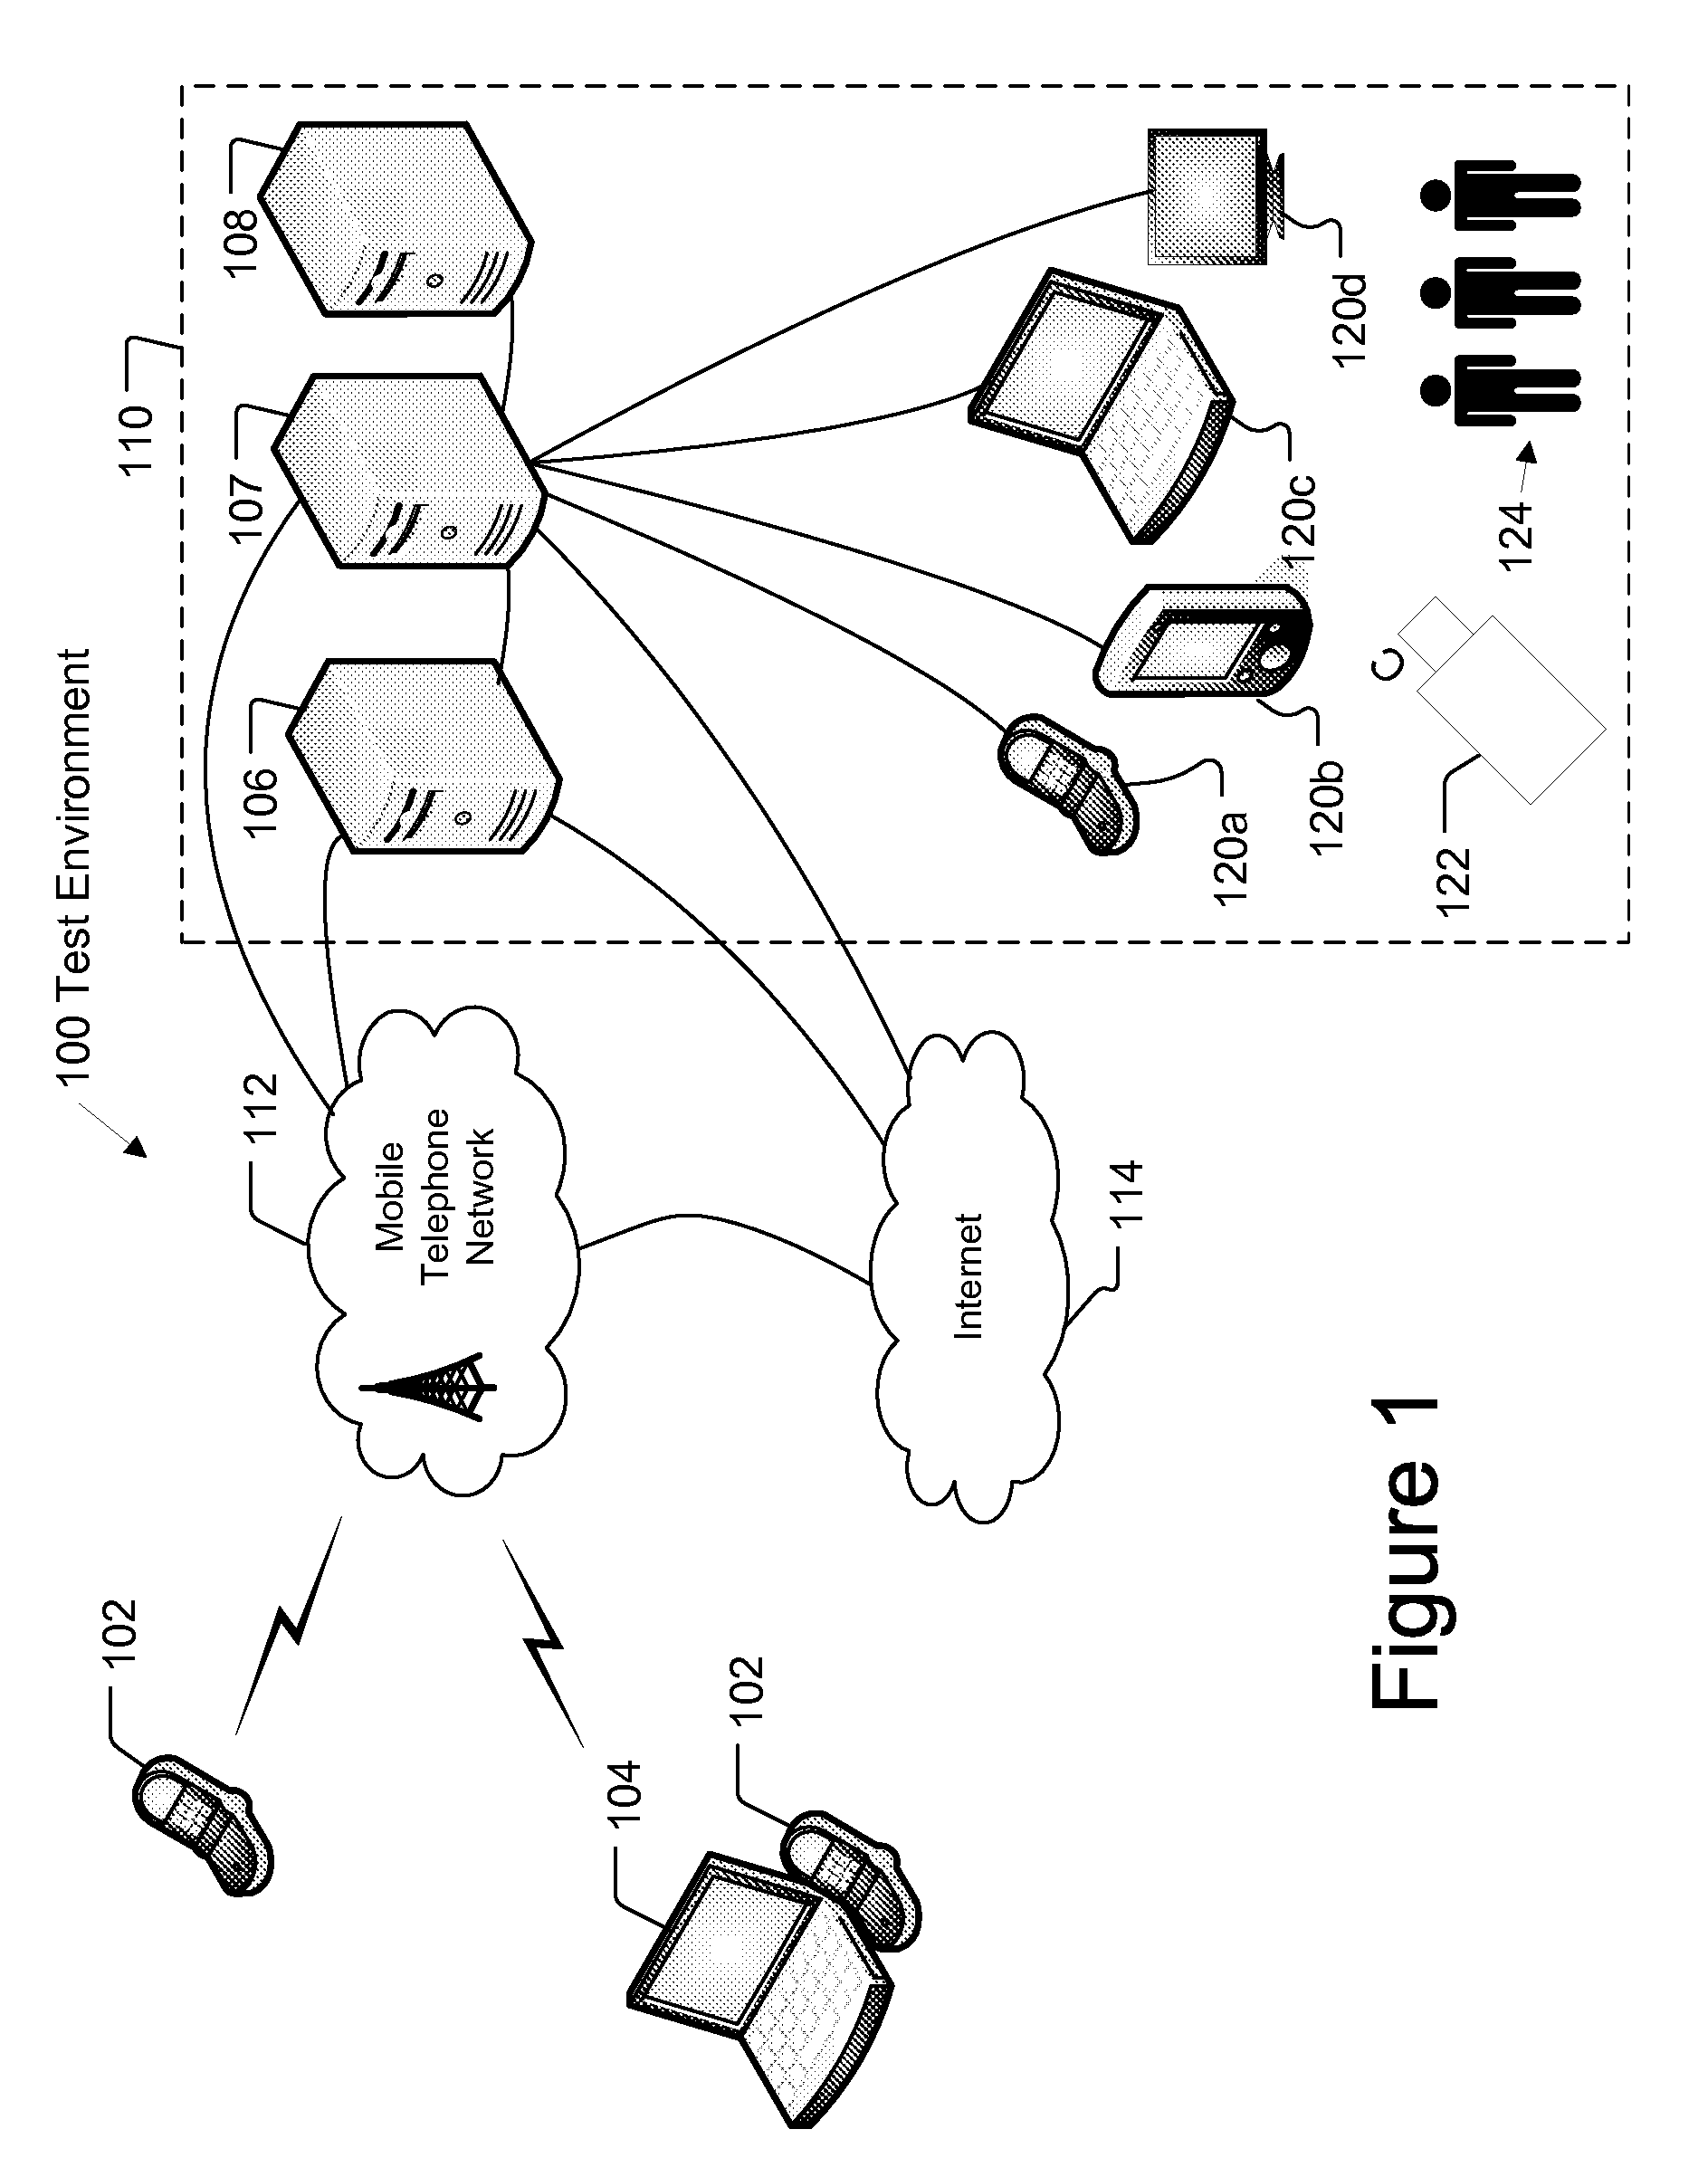 System and Method for Testing Mobile Telephone Data Services